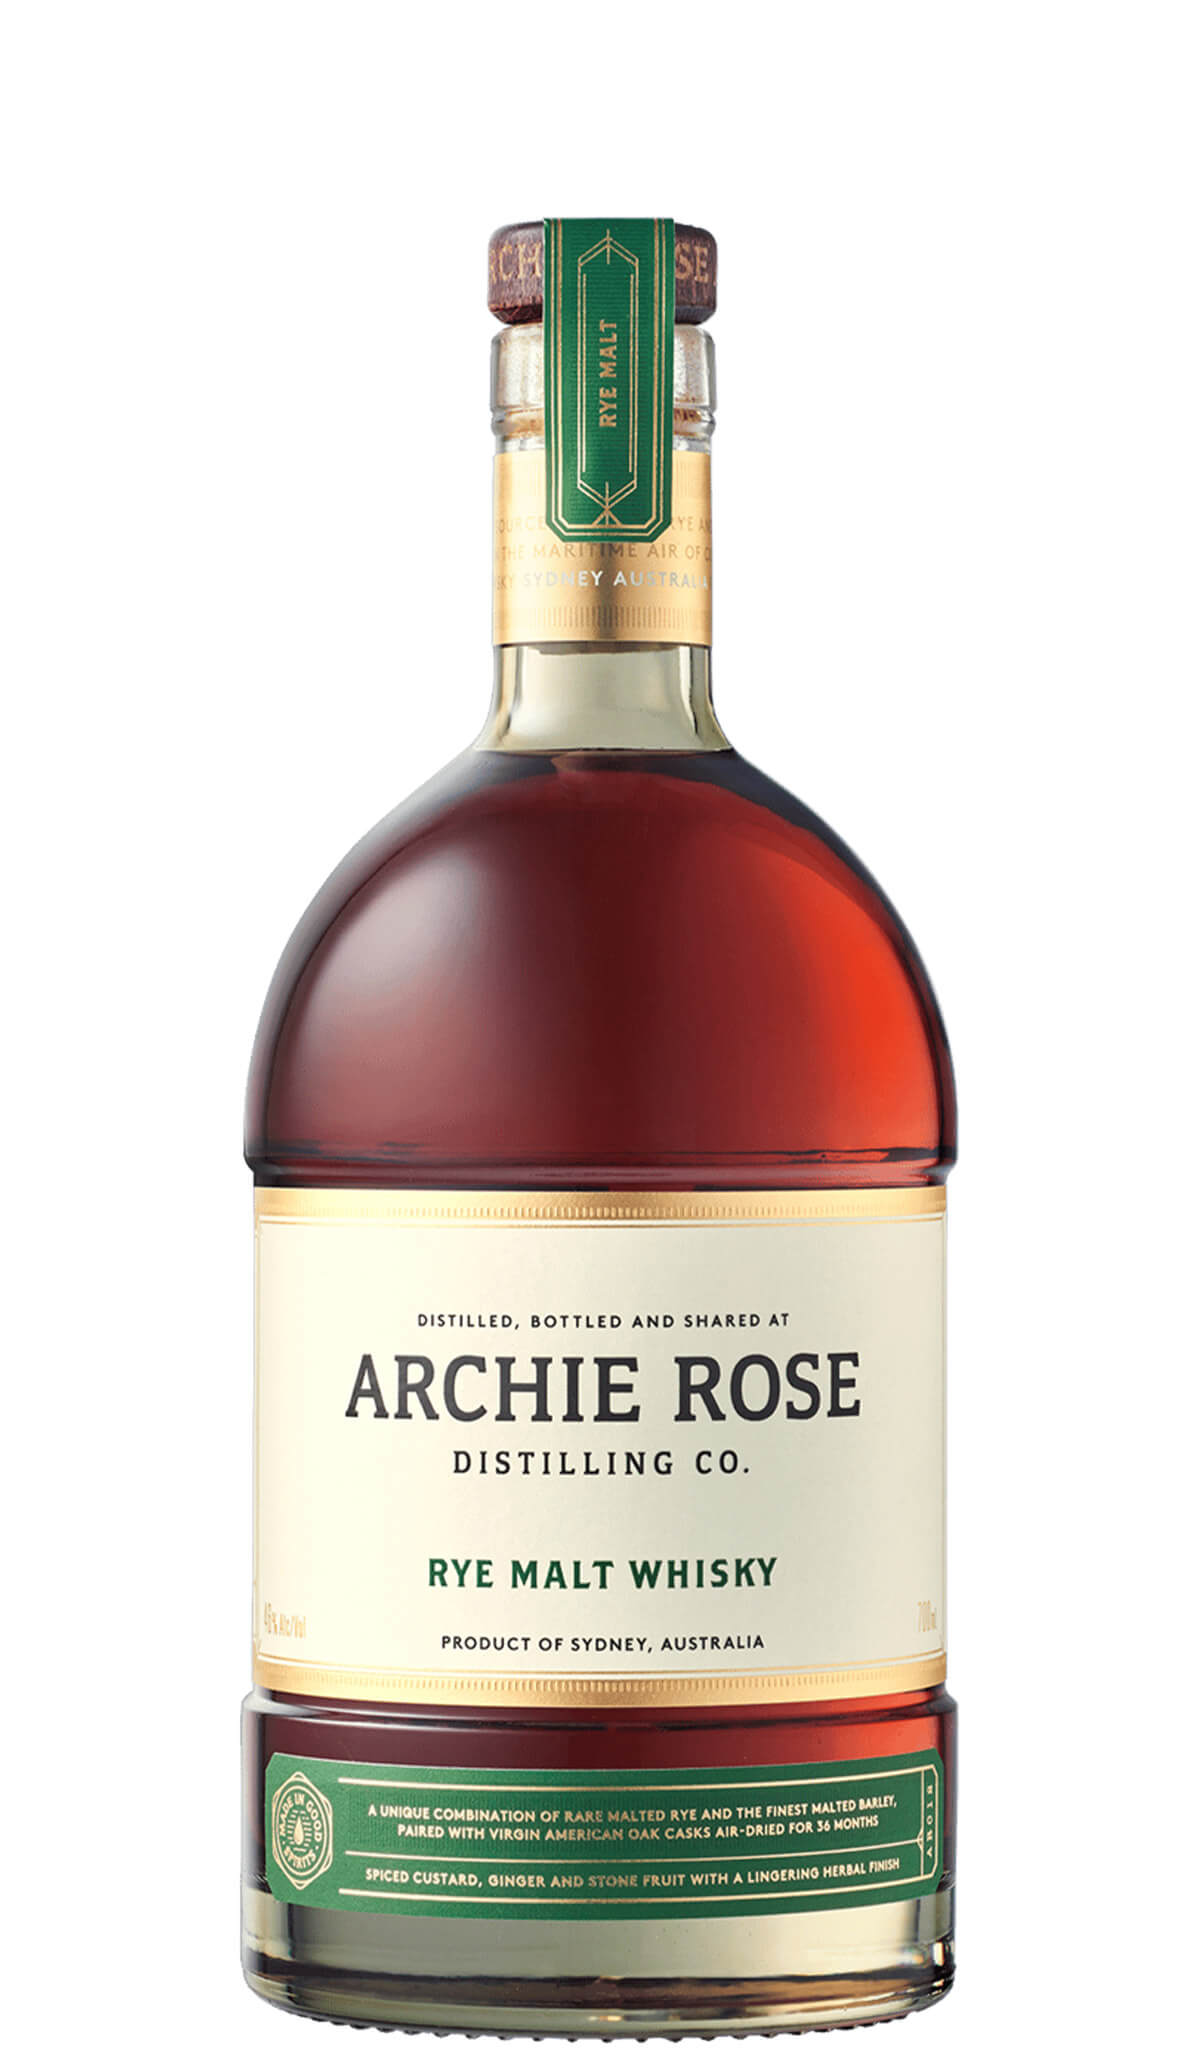 Find out more, explore the range and buy Archie Rose Rye Malt Whisky 700mL available online at Wine Sellers Direct - Australia's independent liquor specialists.